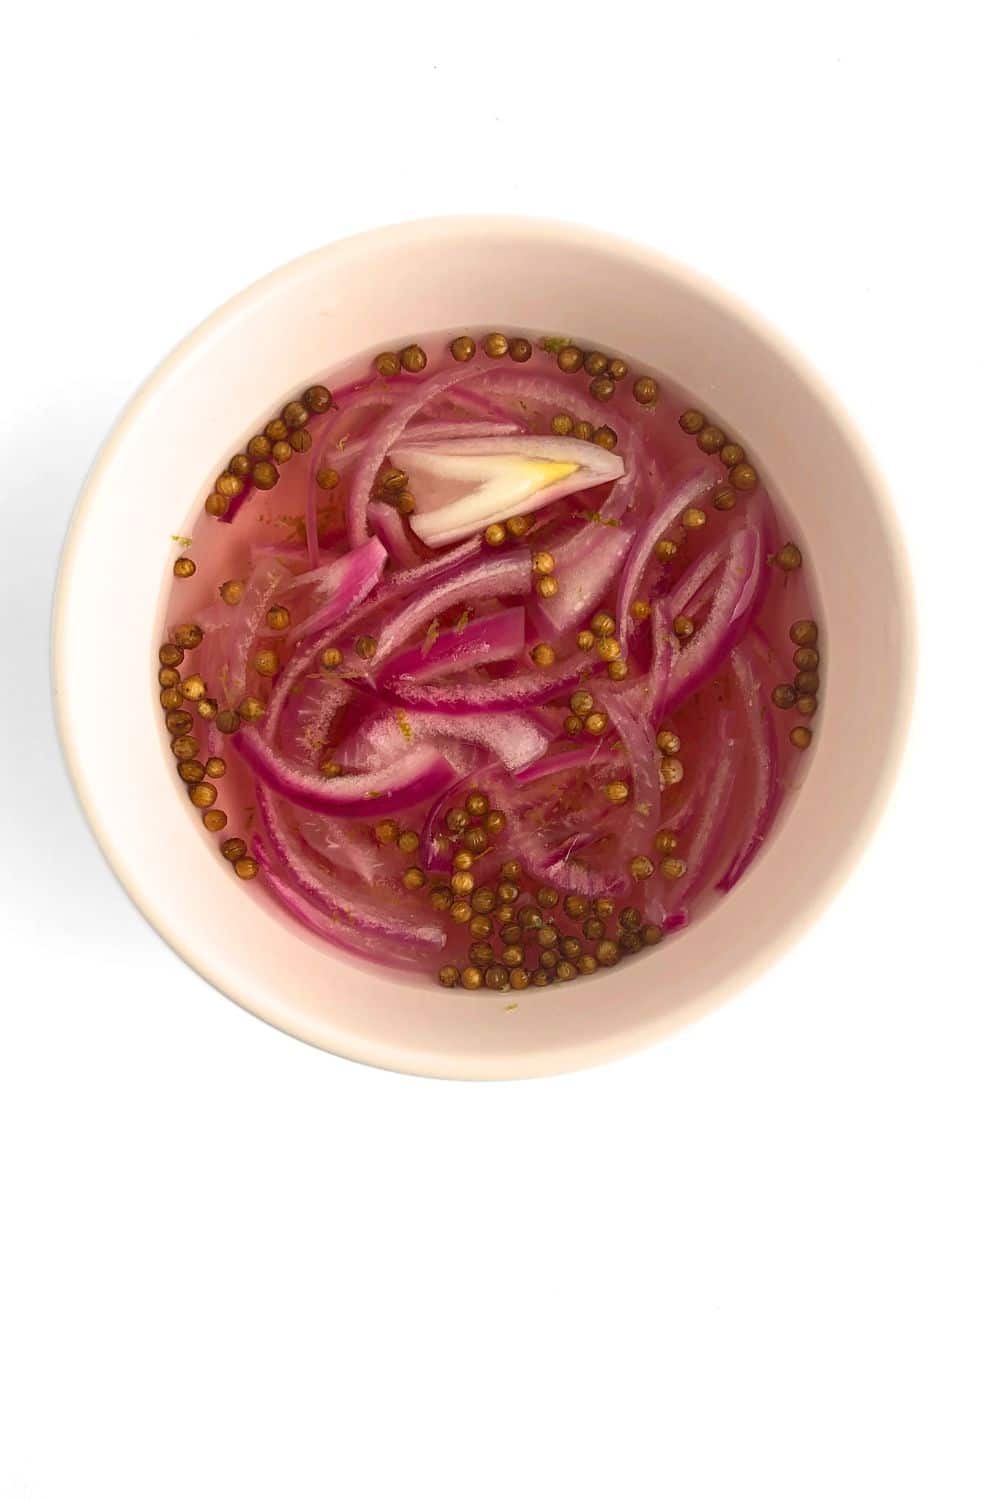 Top-down view of quick pickled onions in a pink bowl against a white background